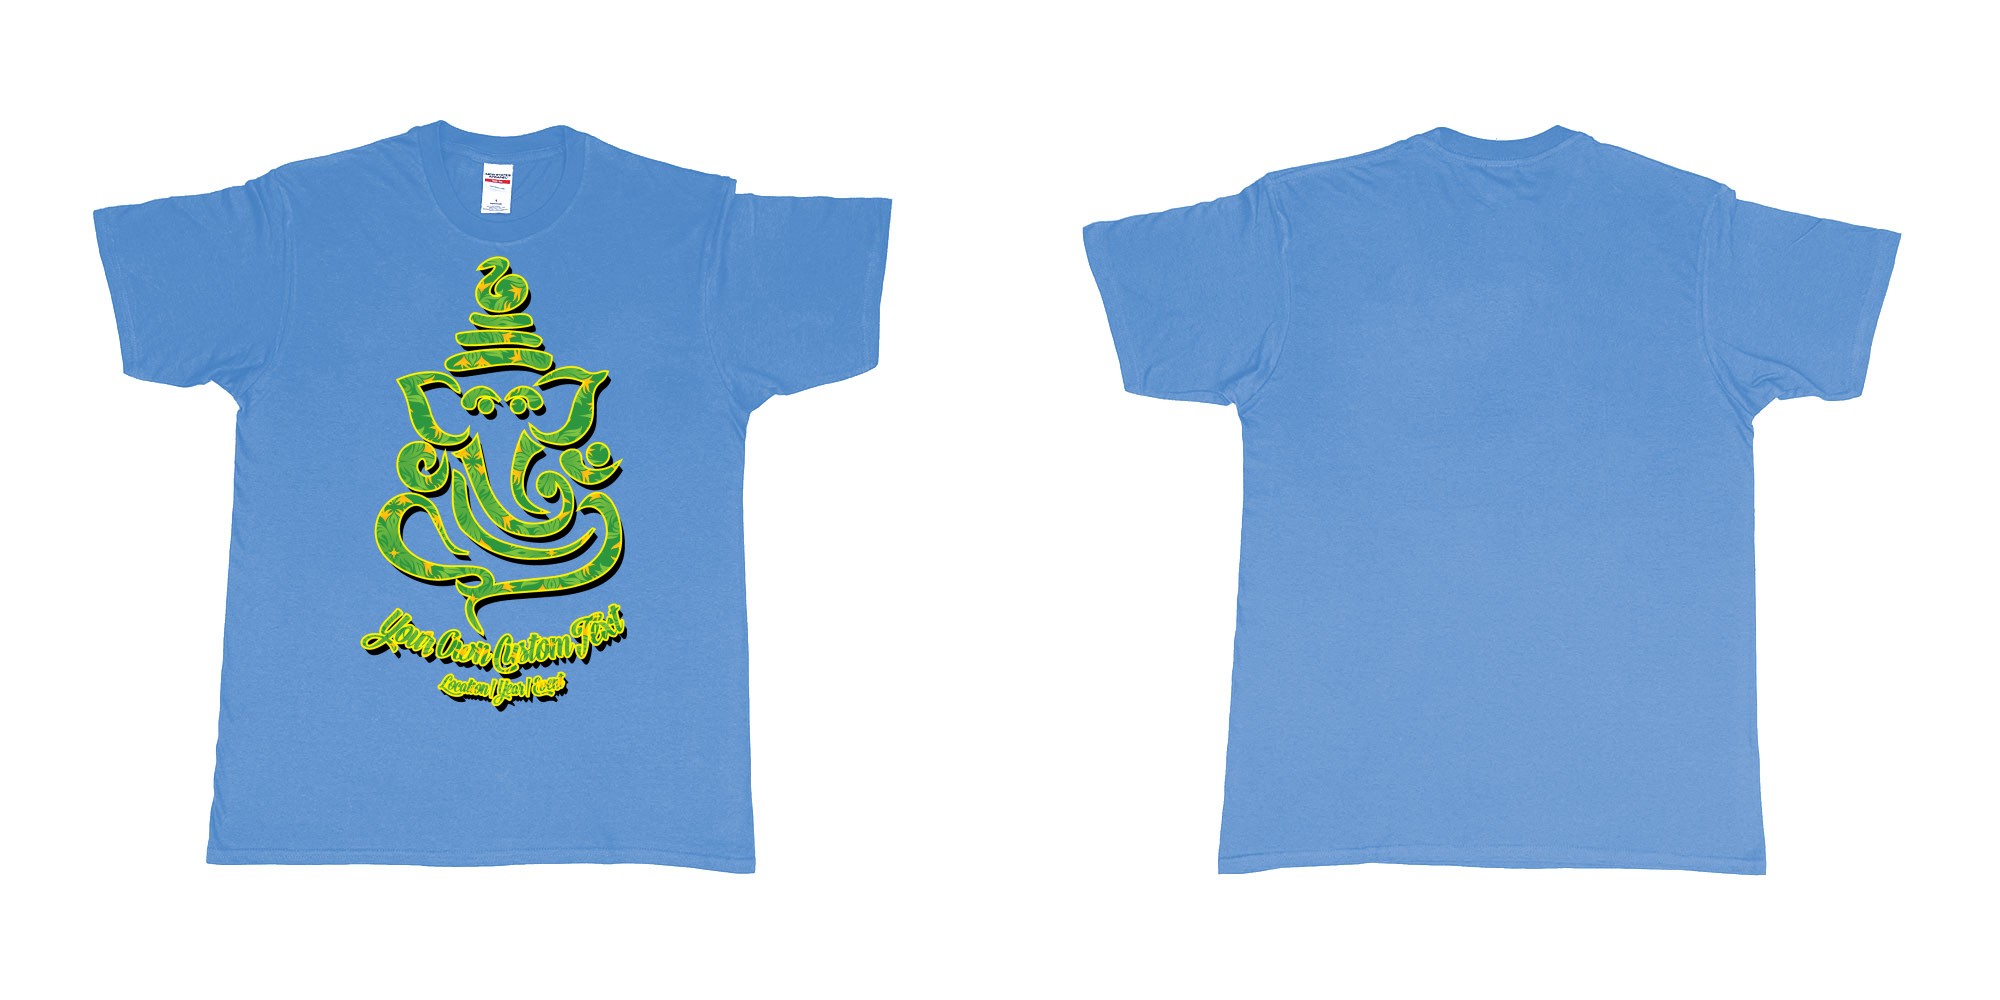 Custom tshirt design ganesh soft jungle yoga customize own design in fabric color carolina-blue choice your own text made in Bali by The Pirate Way